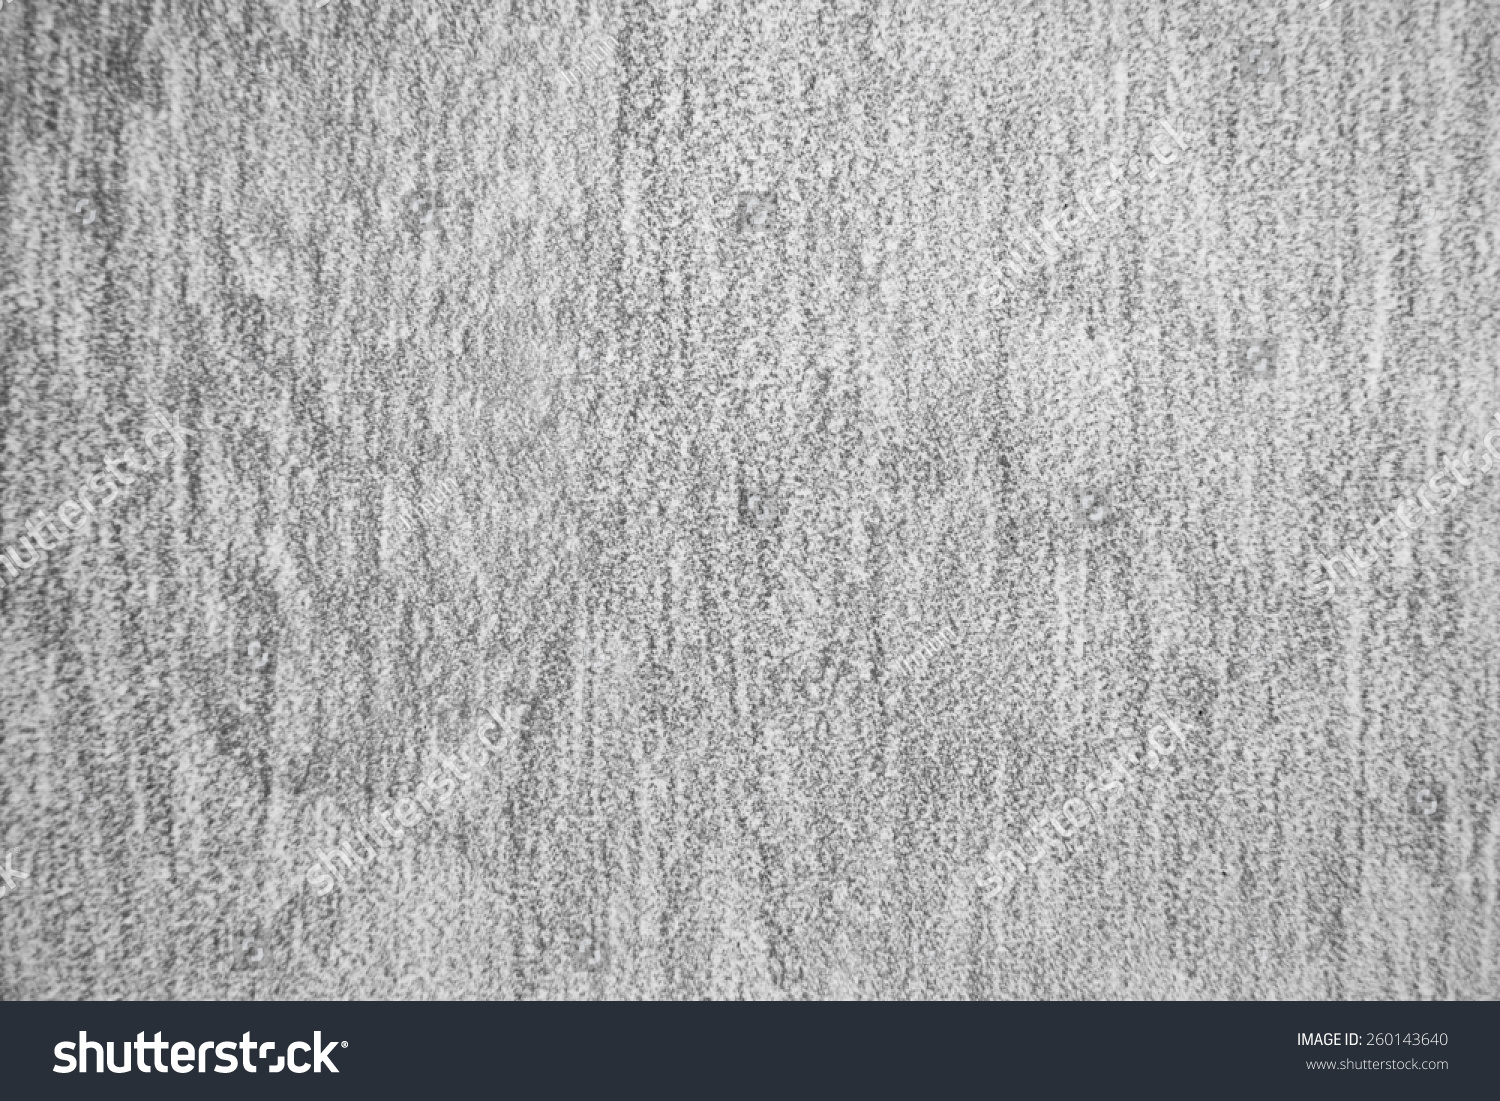 Pencil texture or background #260143640